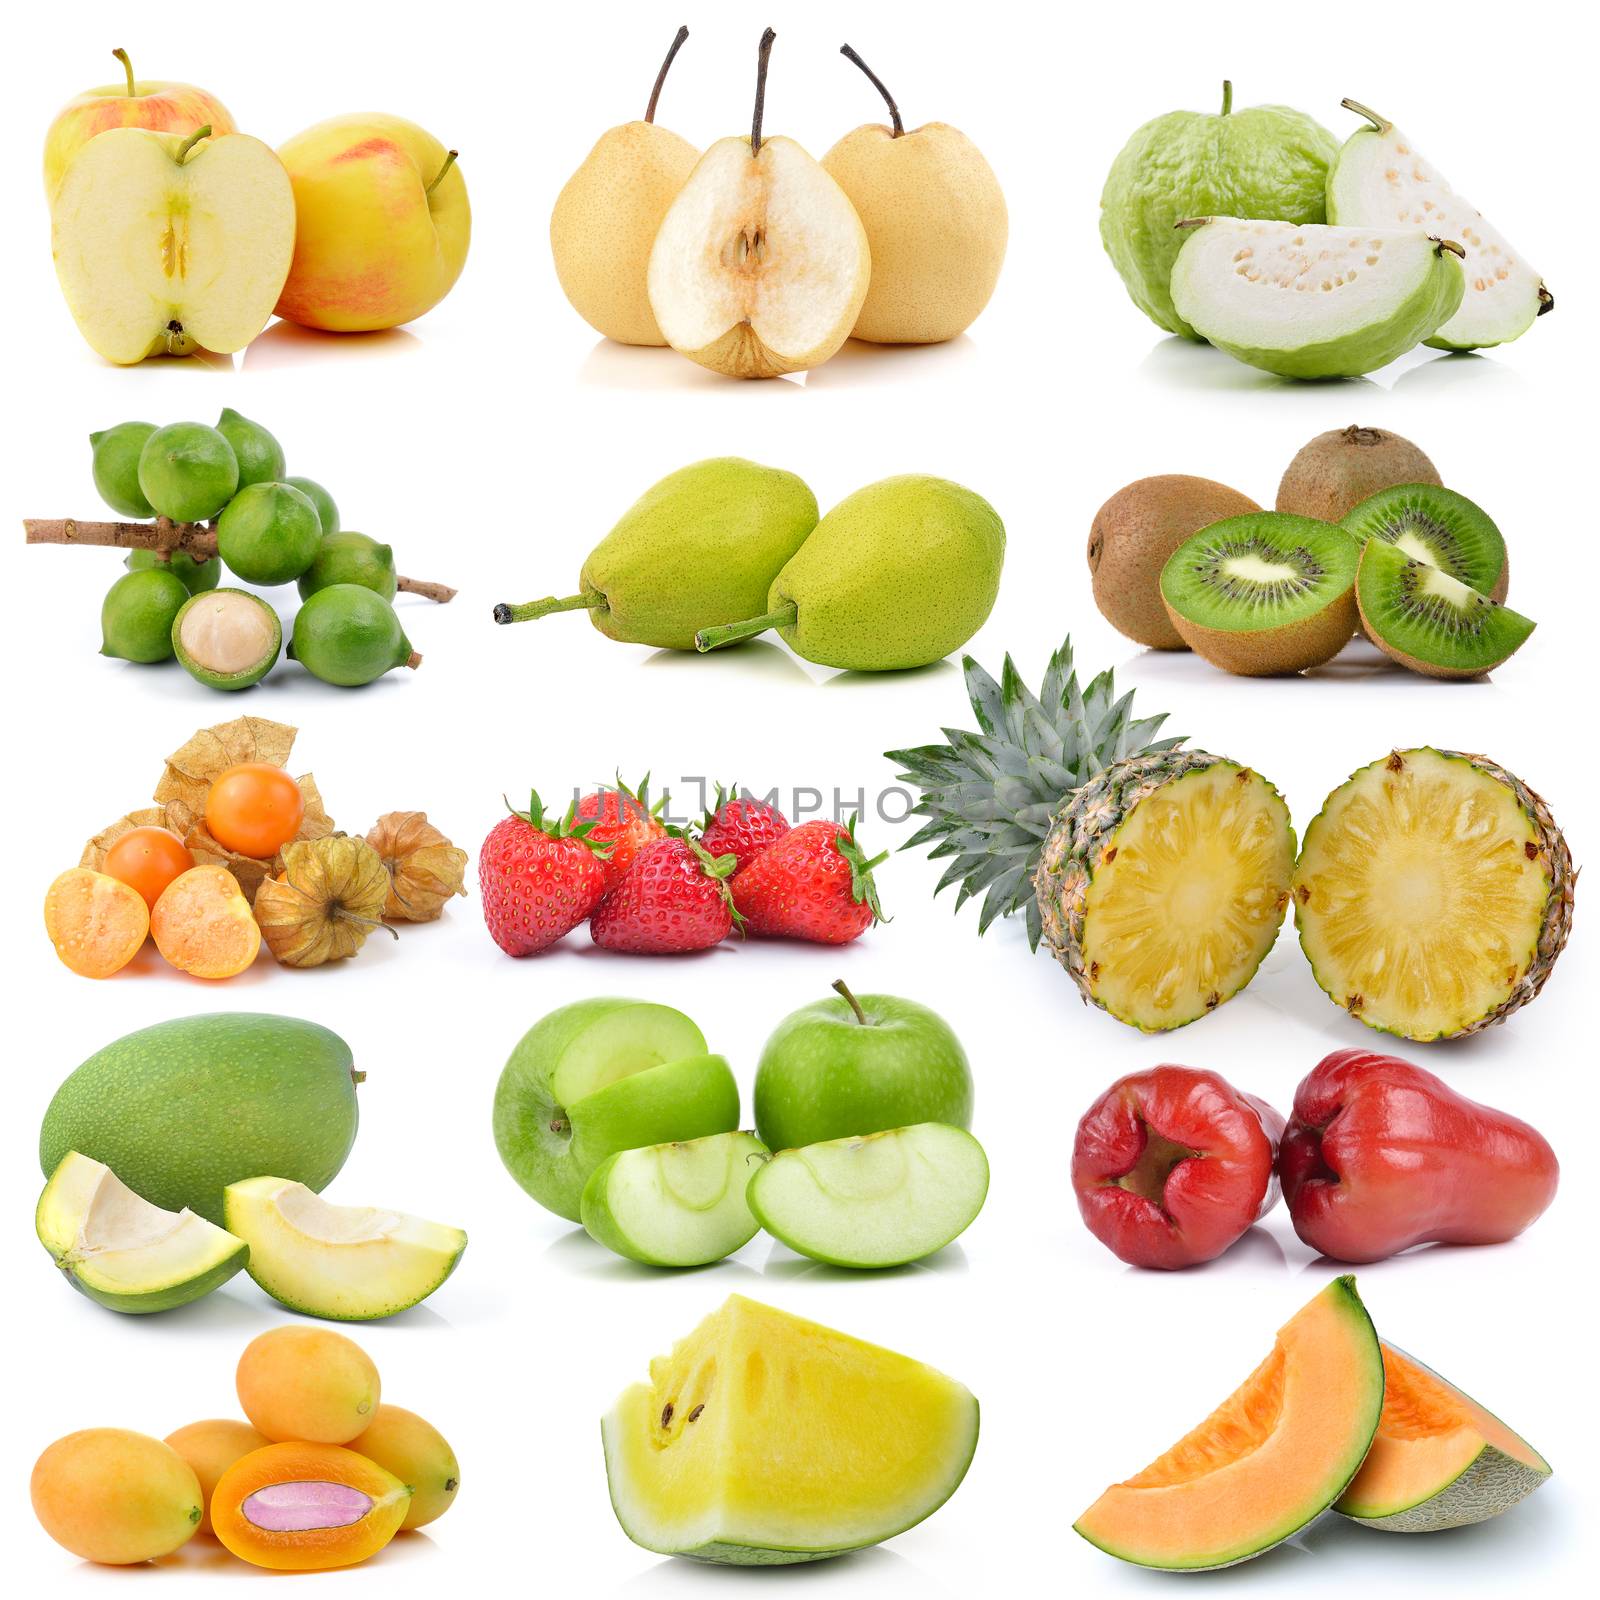 fruit collection isolated on white background